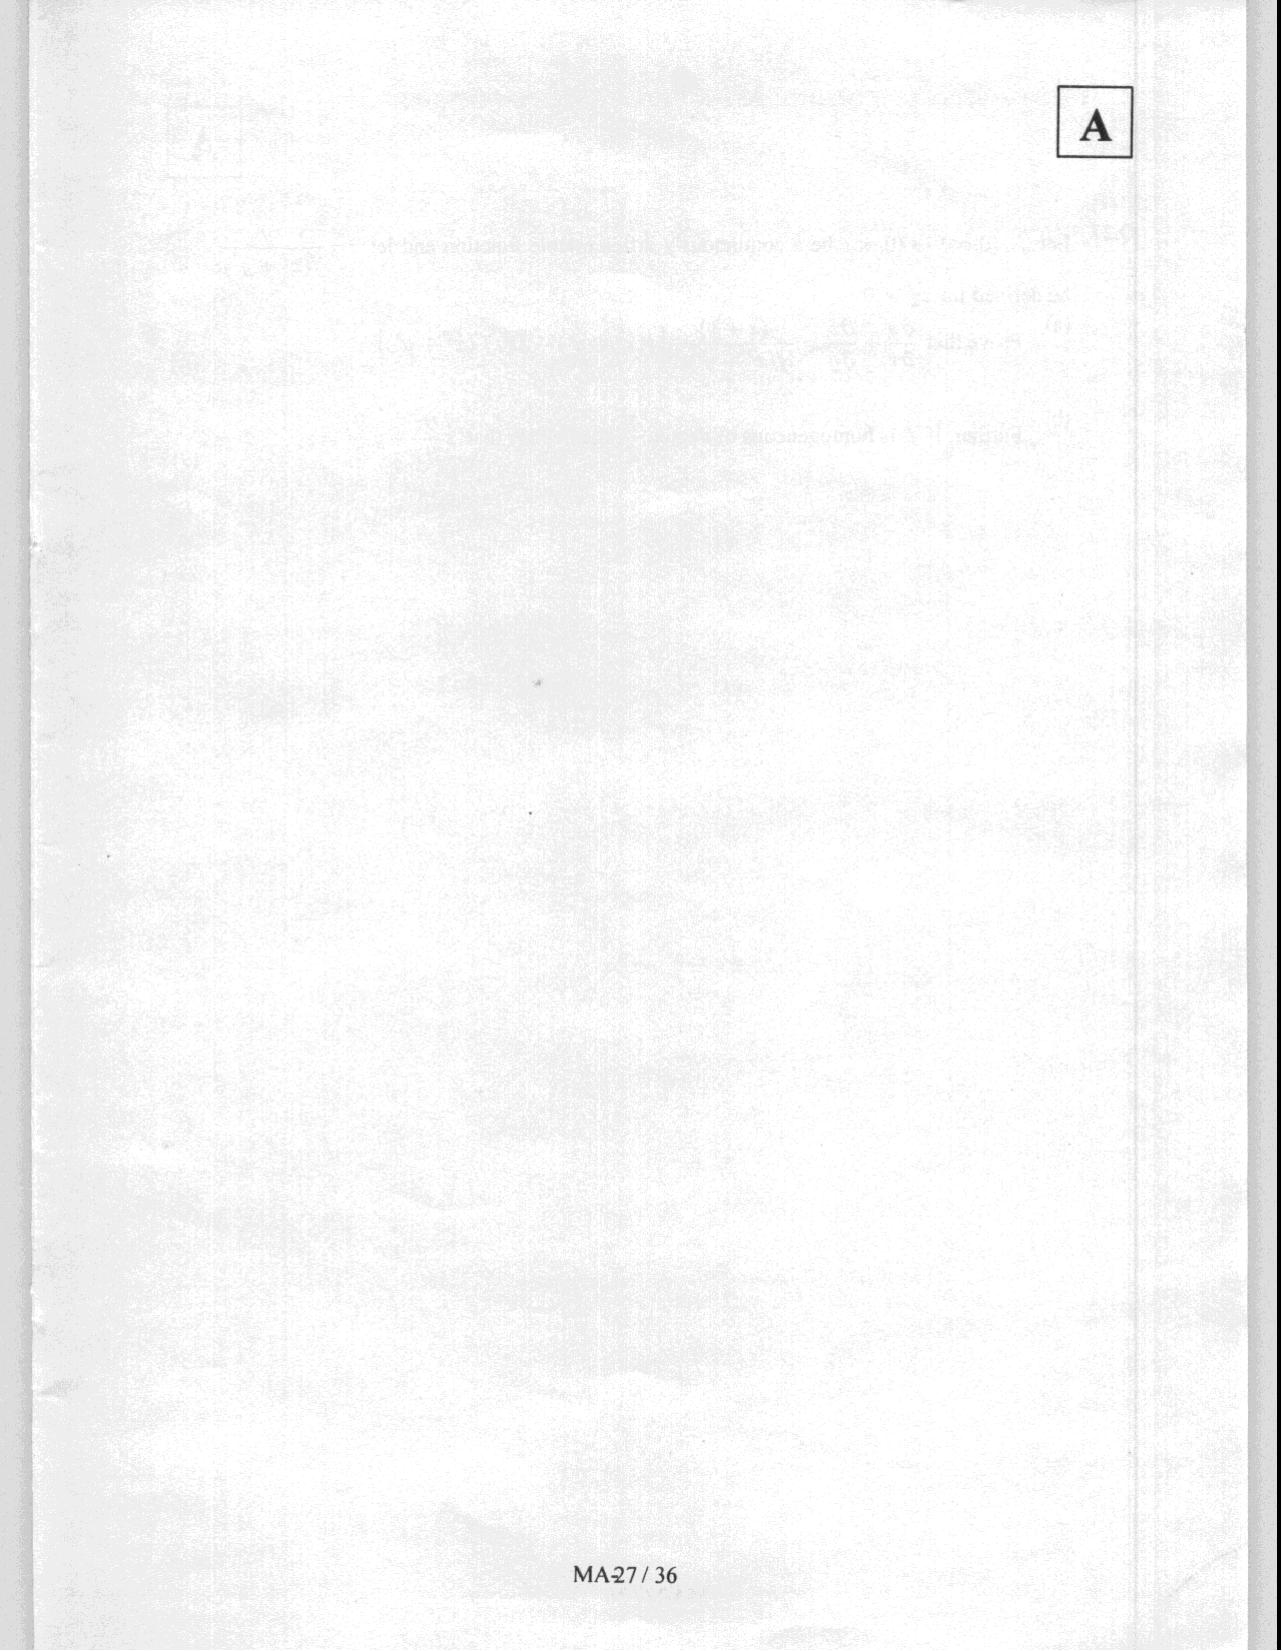 JAM 2008: MA Question Paper - Page 29